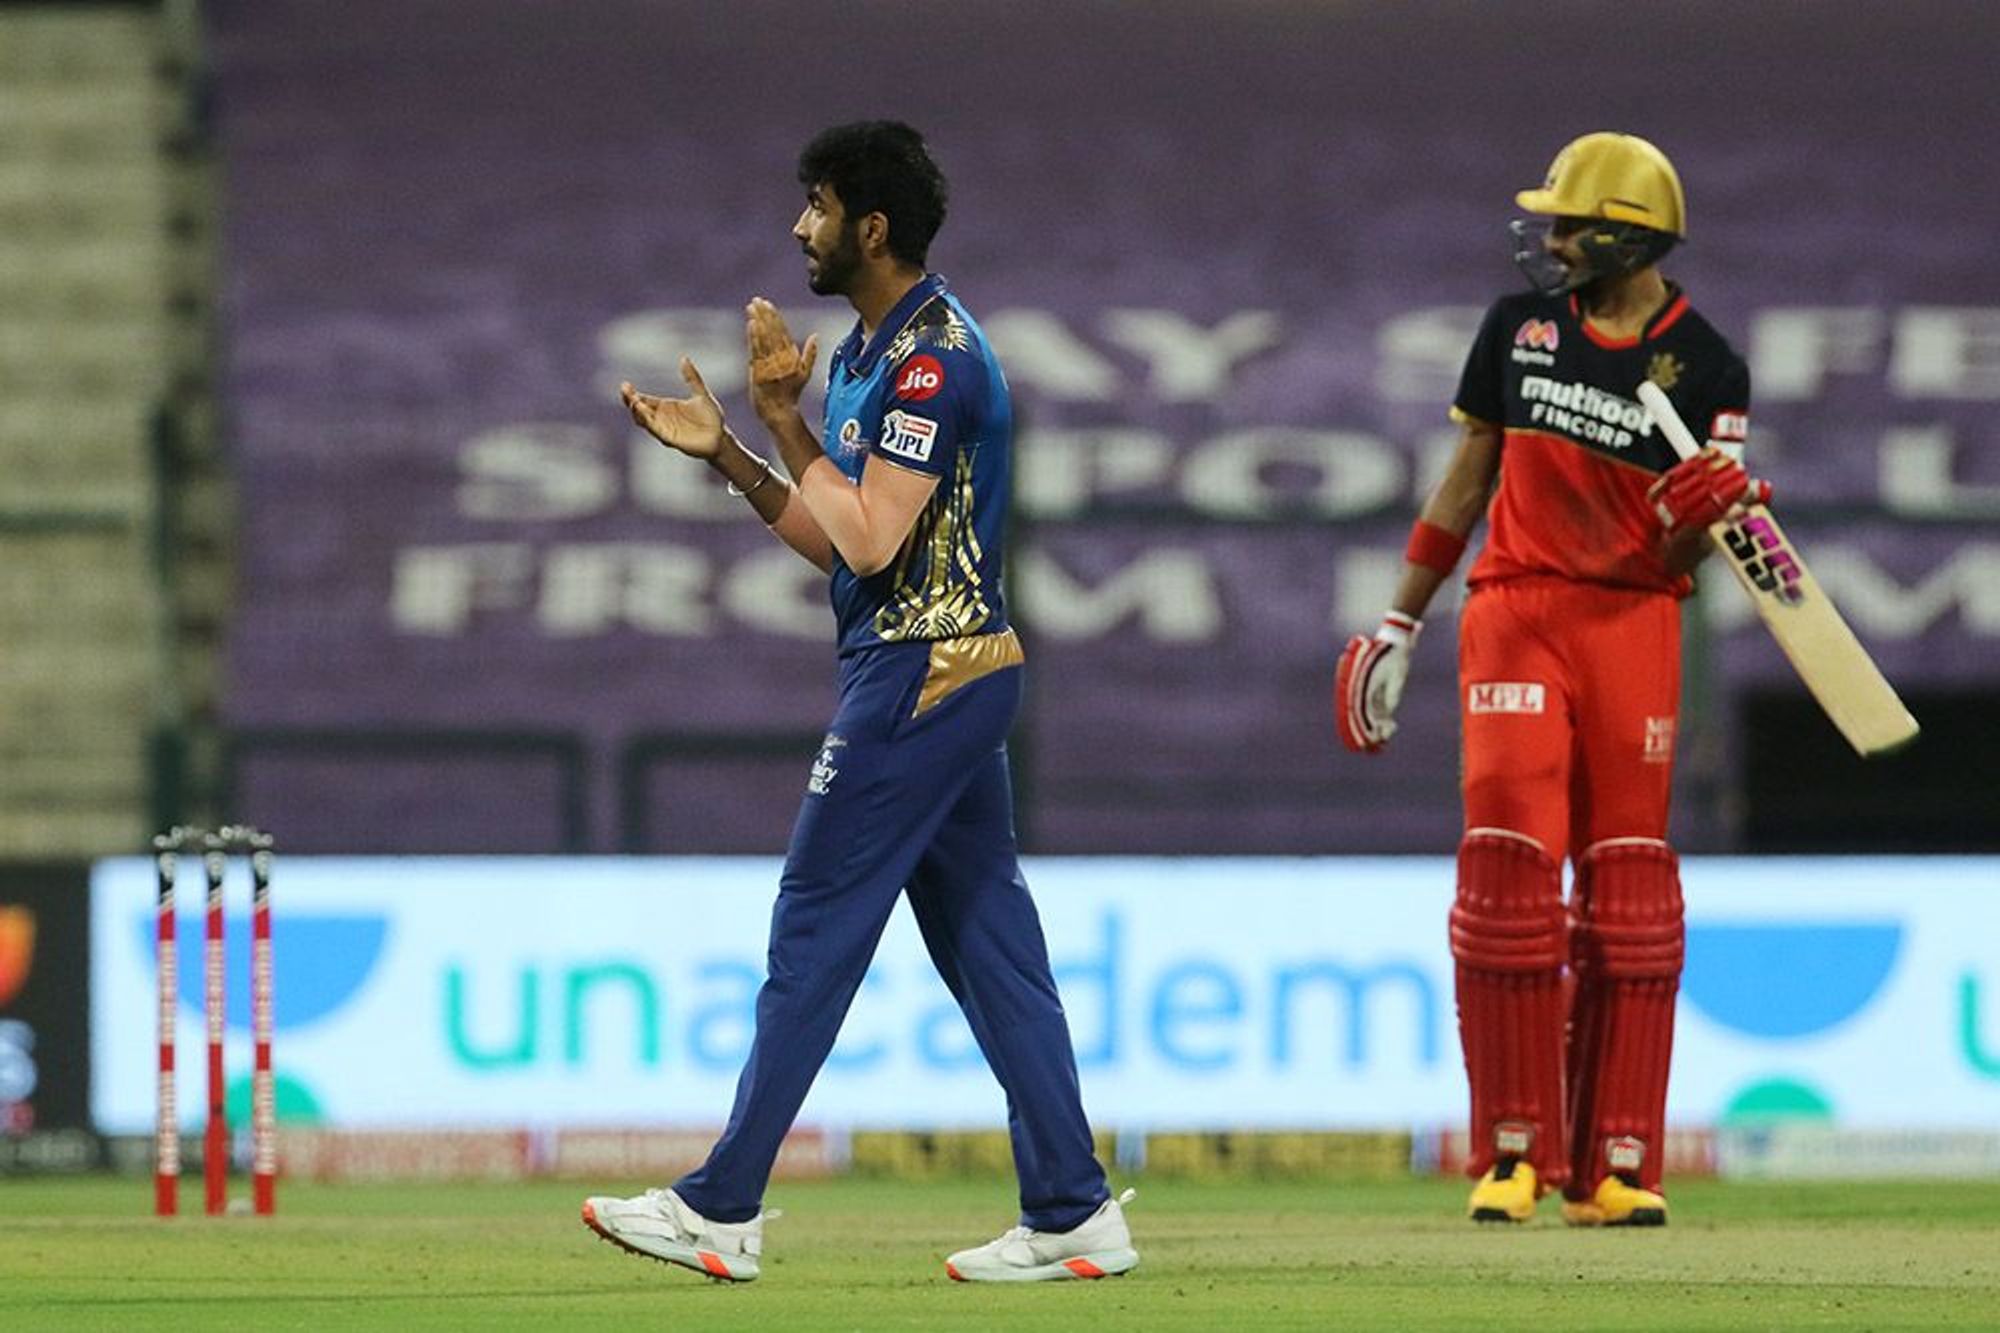 Jasprit Bumrah achieved the feat in his 89th IPL match.